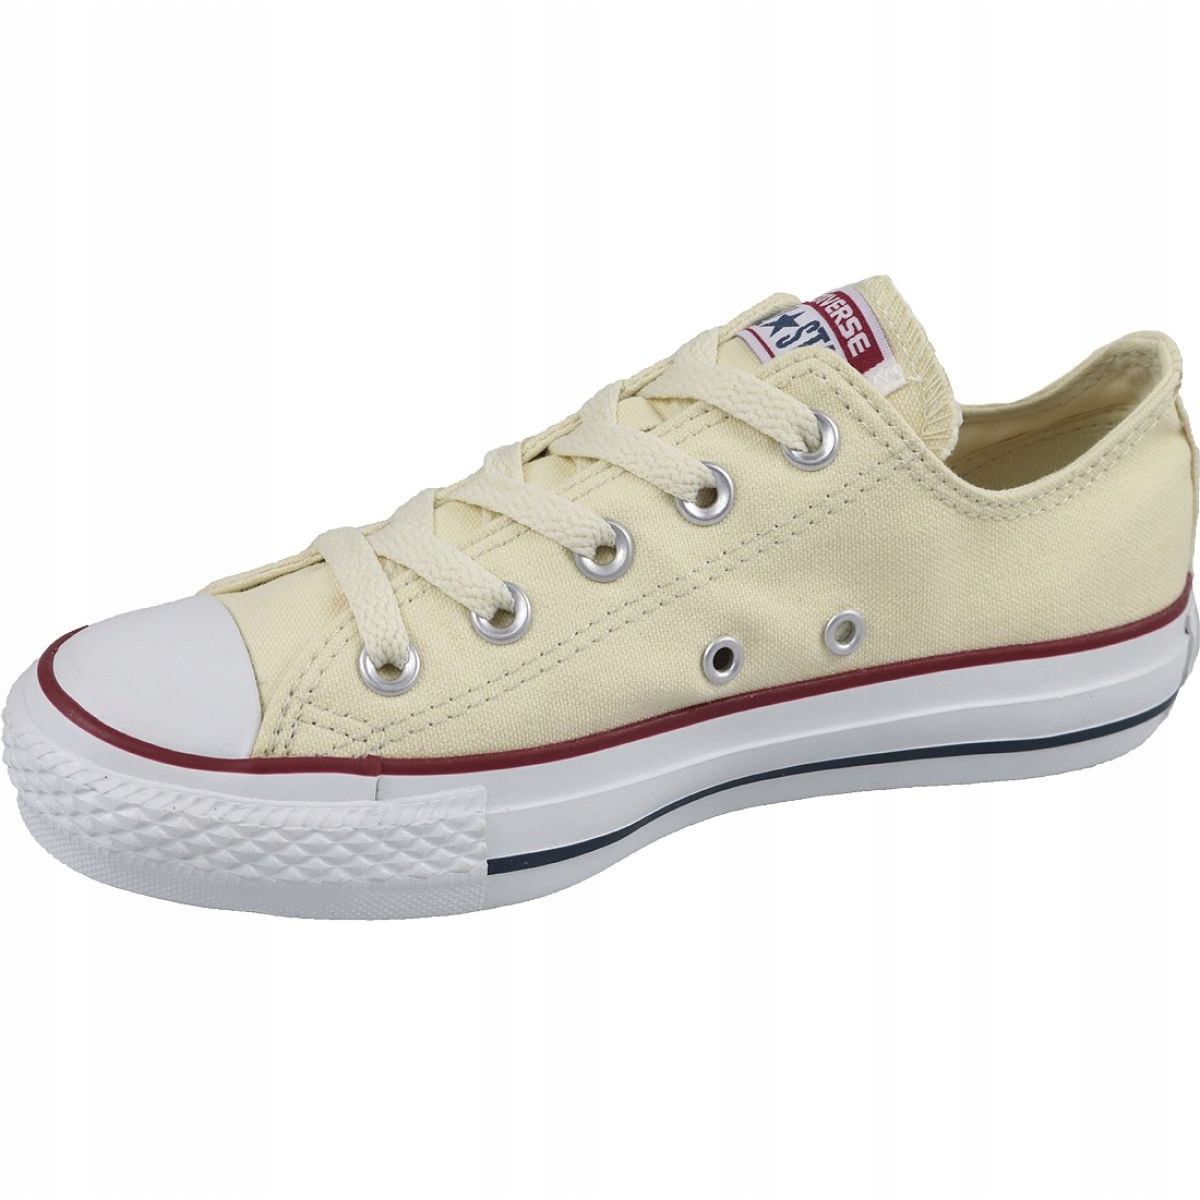 Converse C. Taylor All Star Ox Natural White In M9165 | eBay